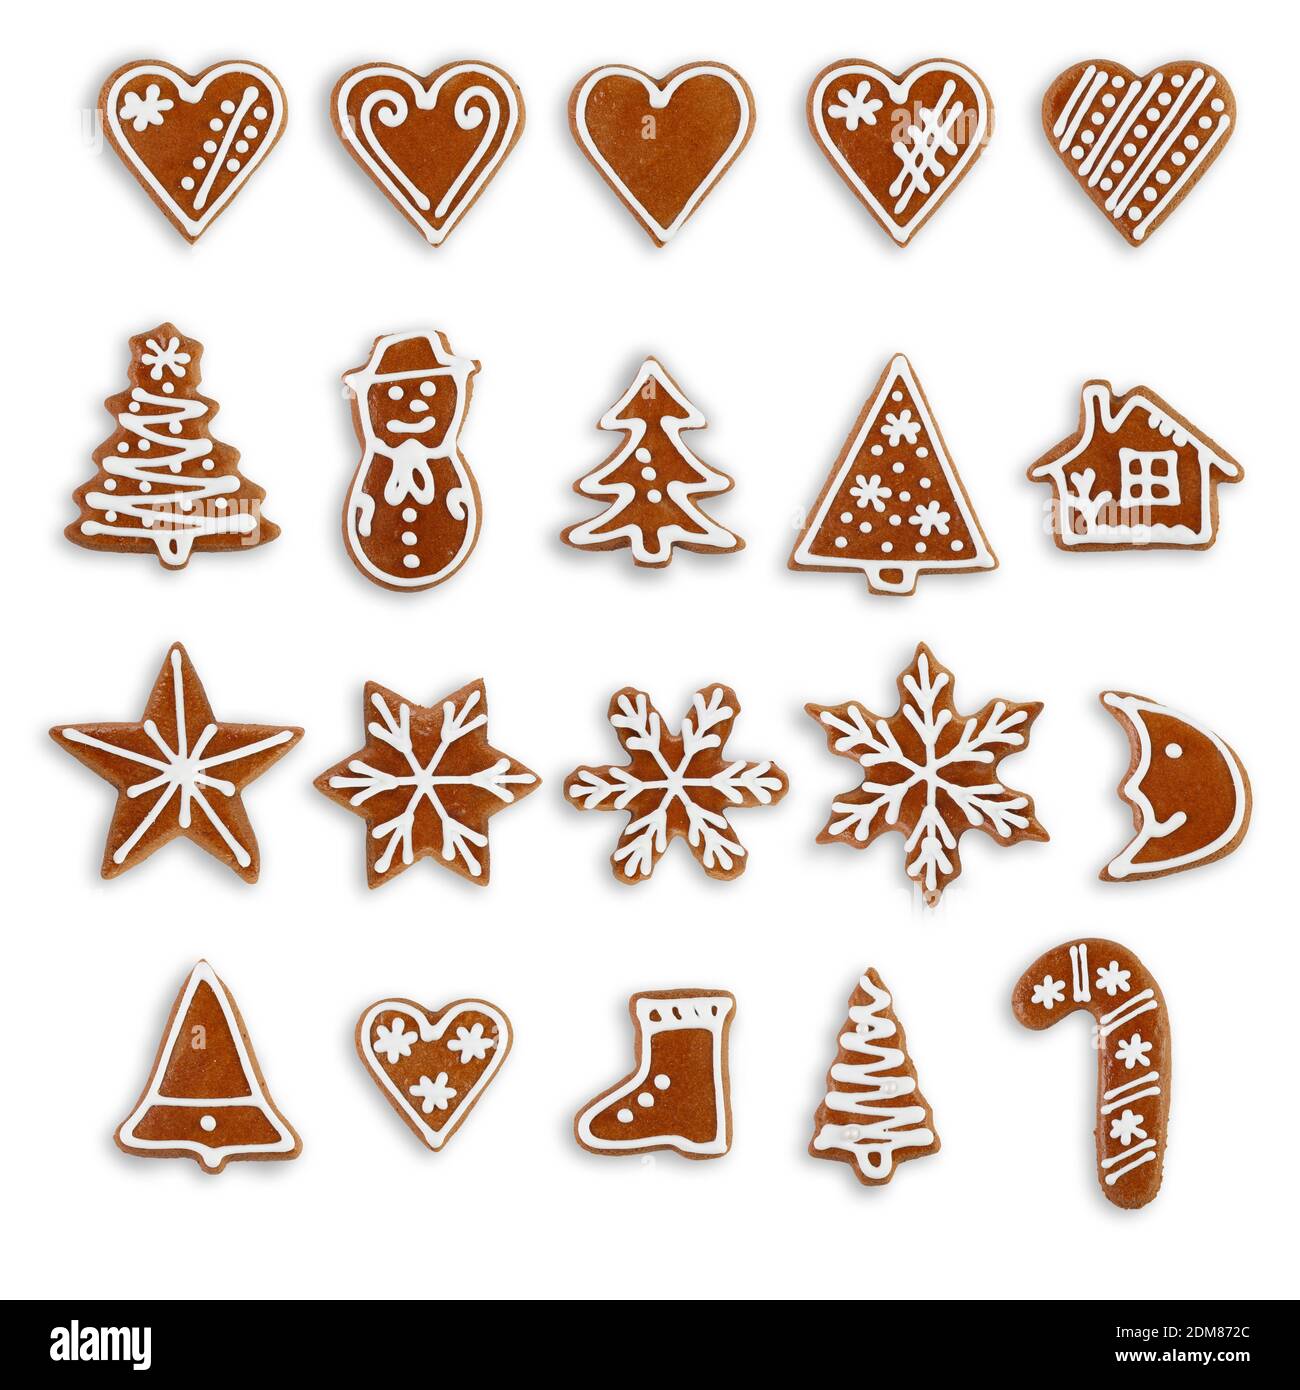 Gingerbread - homemade Christmas cookies isolated on white background Stock Photo